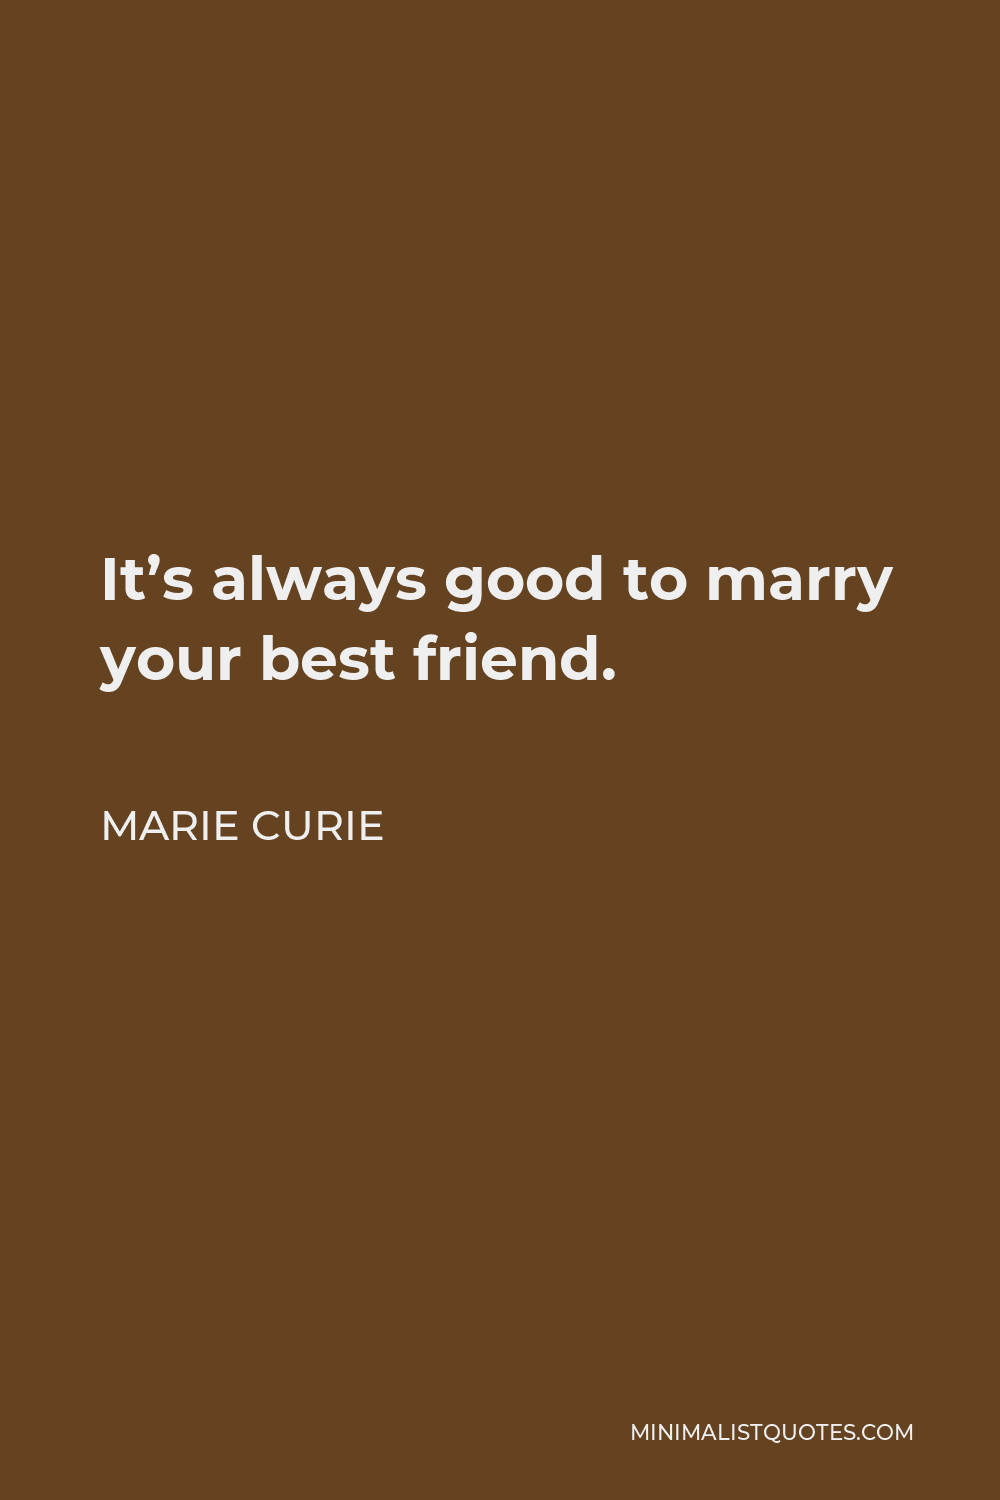 Marie Curie Quote - It’s always good to marry your best friend.